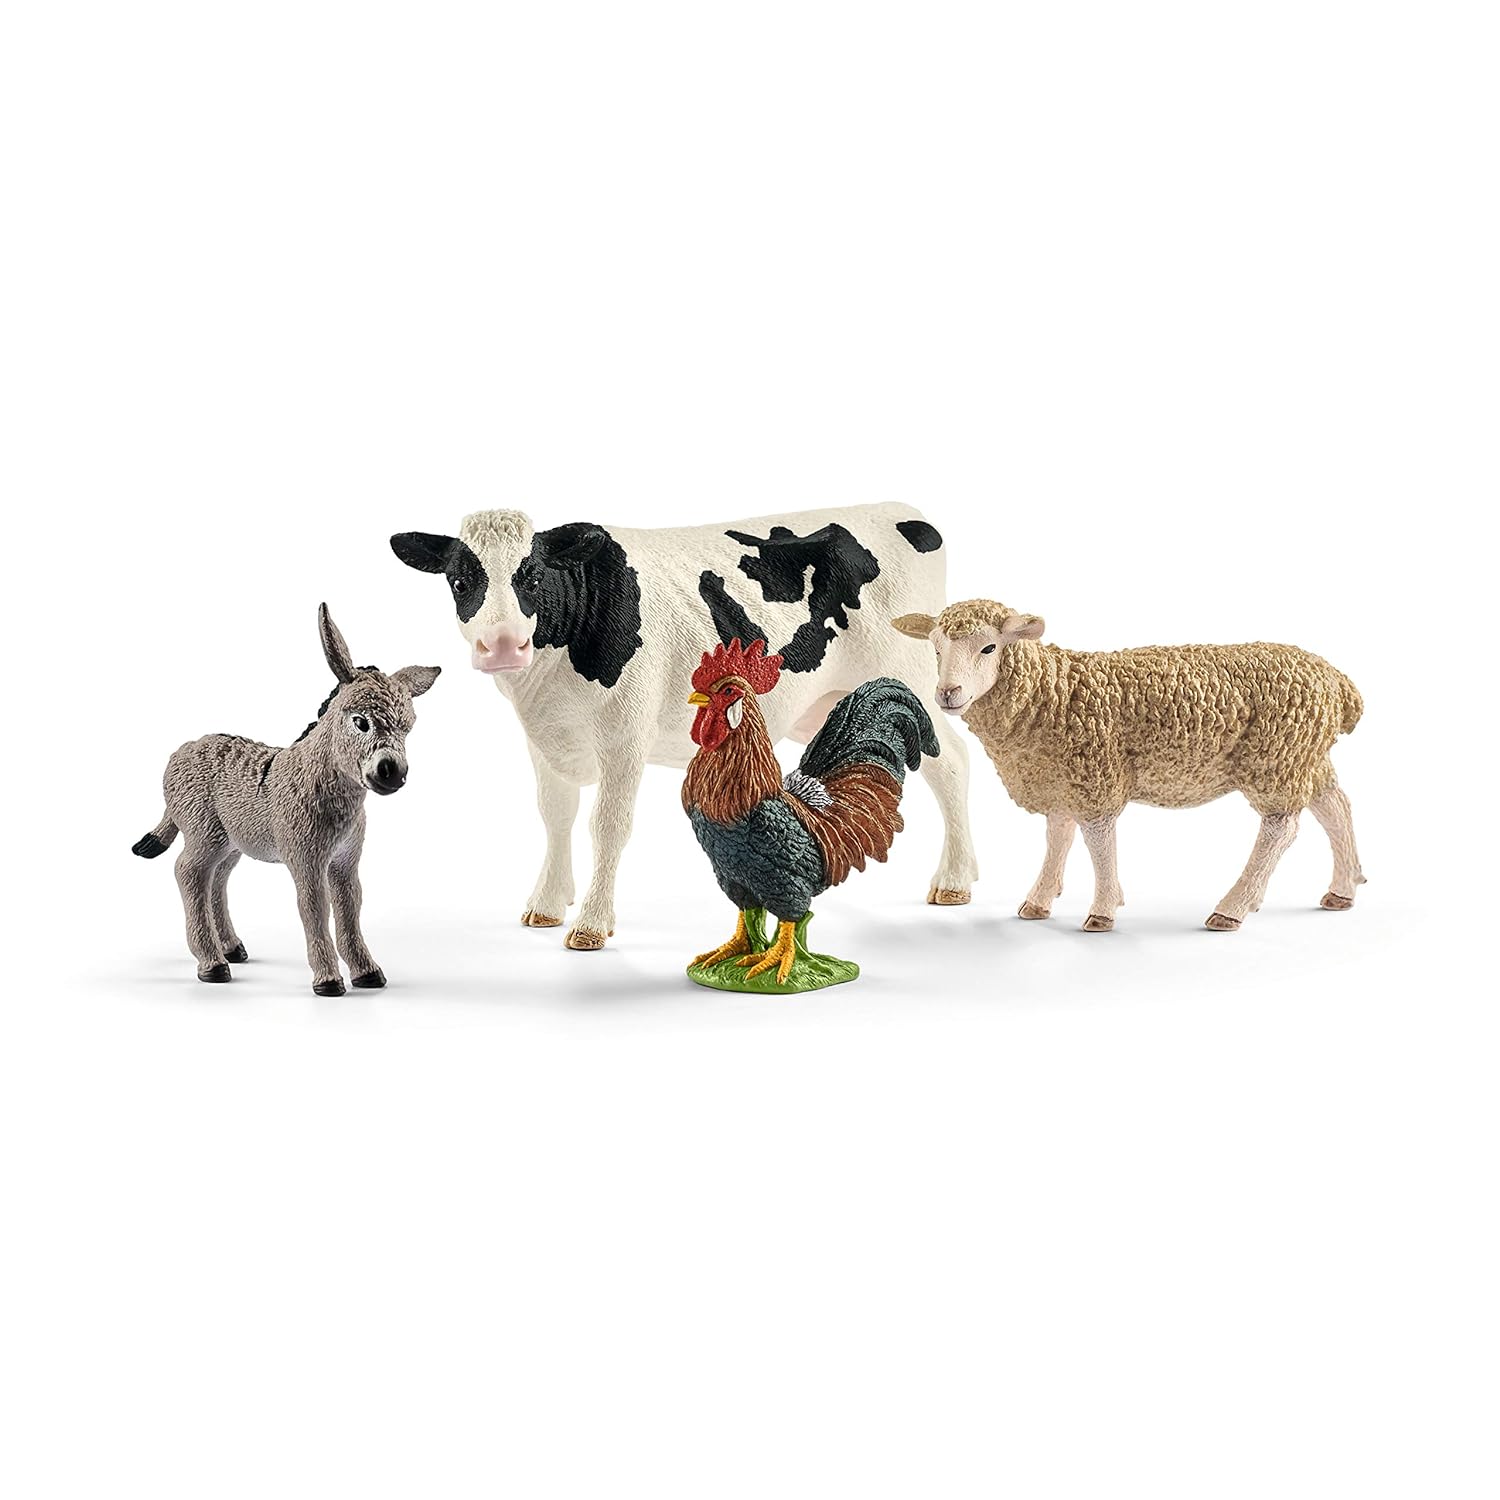 Schleich Farm Animal Toys and Playsets - Farm World 4 Piece Starter Set with Cow, Rooster, Sheep, and Donkey Figurine, Farm…